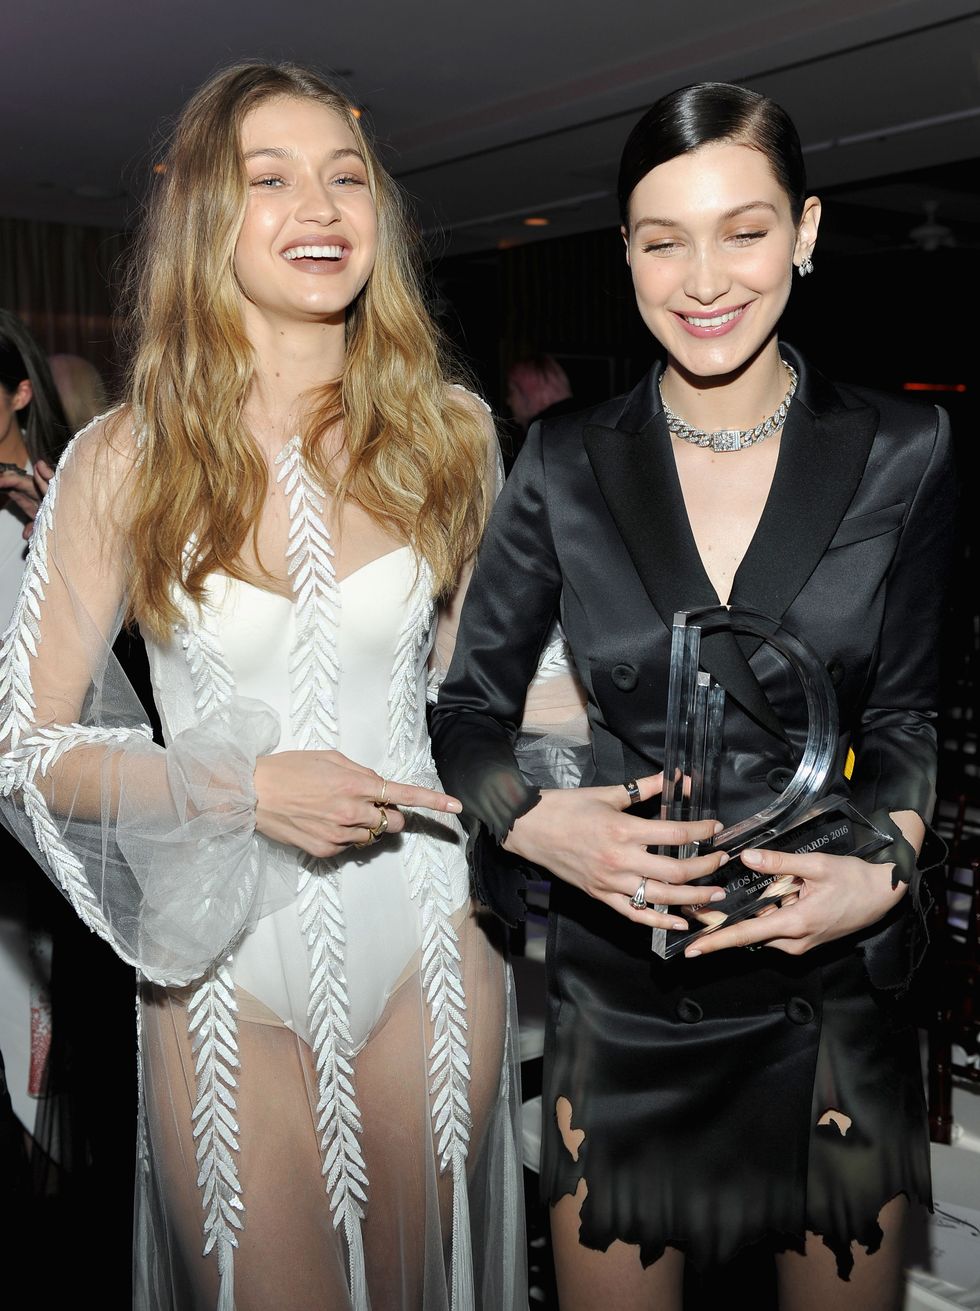 WEST HOLLYWOOD, CA - MARCH 20:  EXCLUSIVE COVERAGE Model Gigi Hadid (L) and Model of the Year award recipient Bella Hadid attend The Daily Front Row "Fashion Los Angeles Awards" 2016 at Sunset Tower Hotel on March 20, 2016 in West Hollywood, California.  (Photo by Donato Sardella/Getty Images for The Daily Front Row)